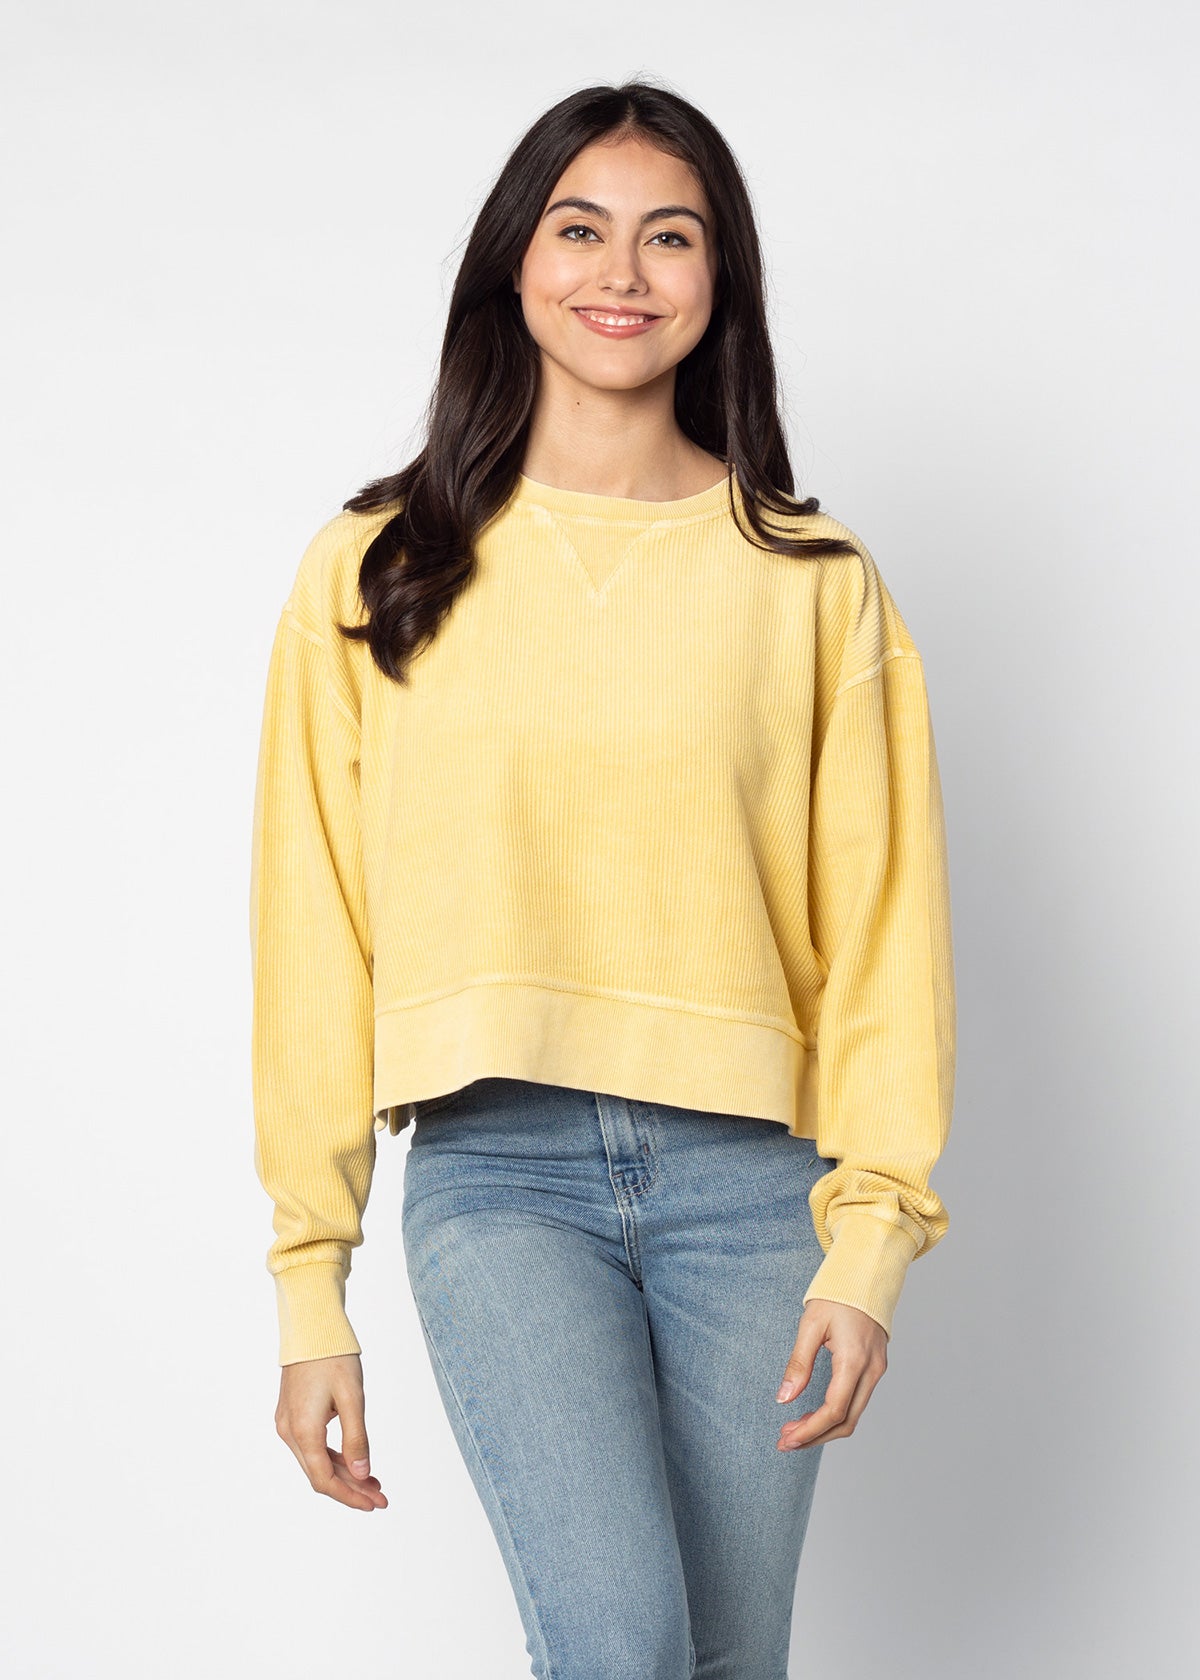 Corded Boxy Pullover